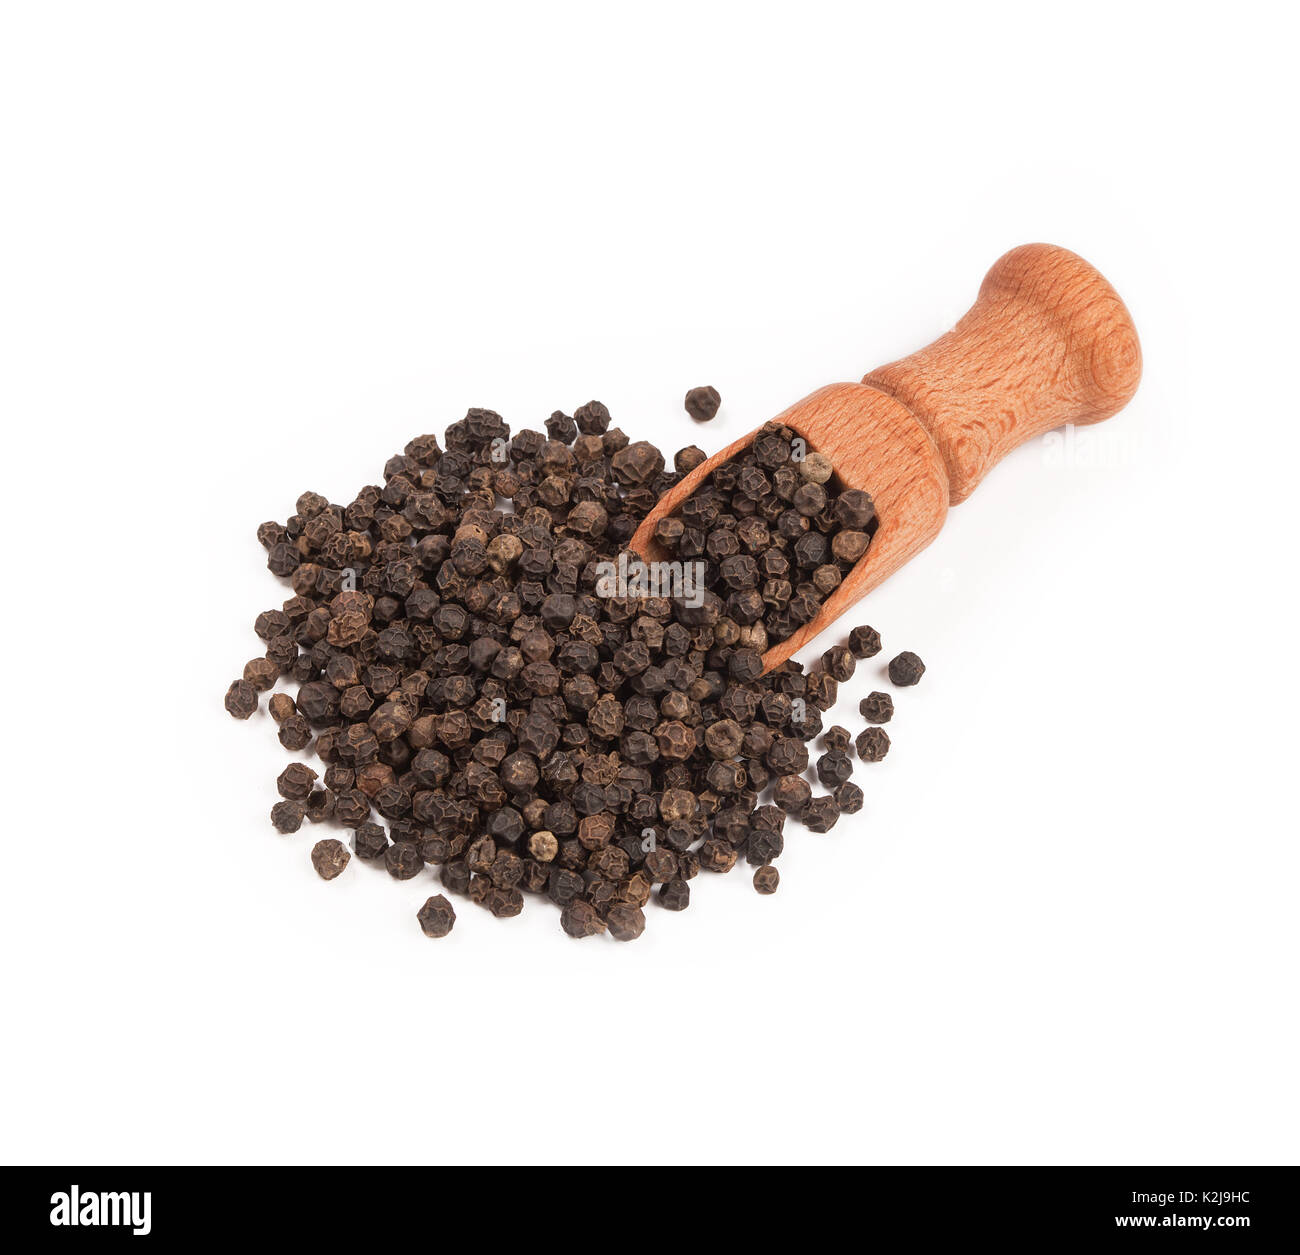 Wooden shovel with black peppercorn scattered from it Stock Photo